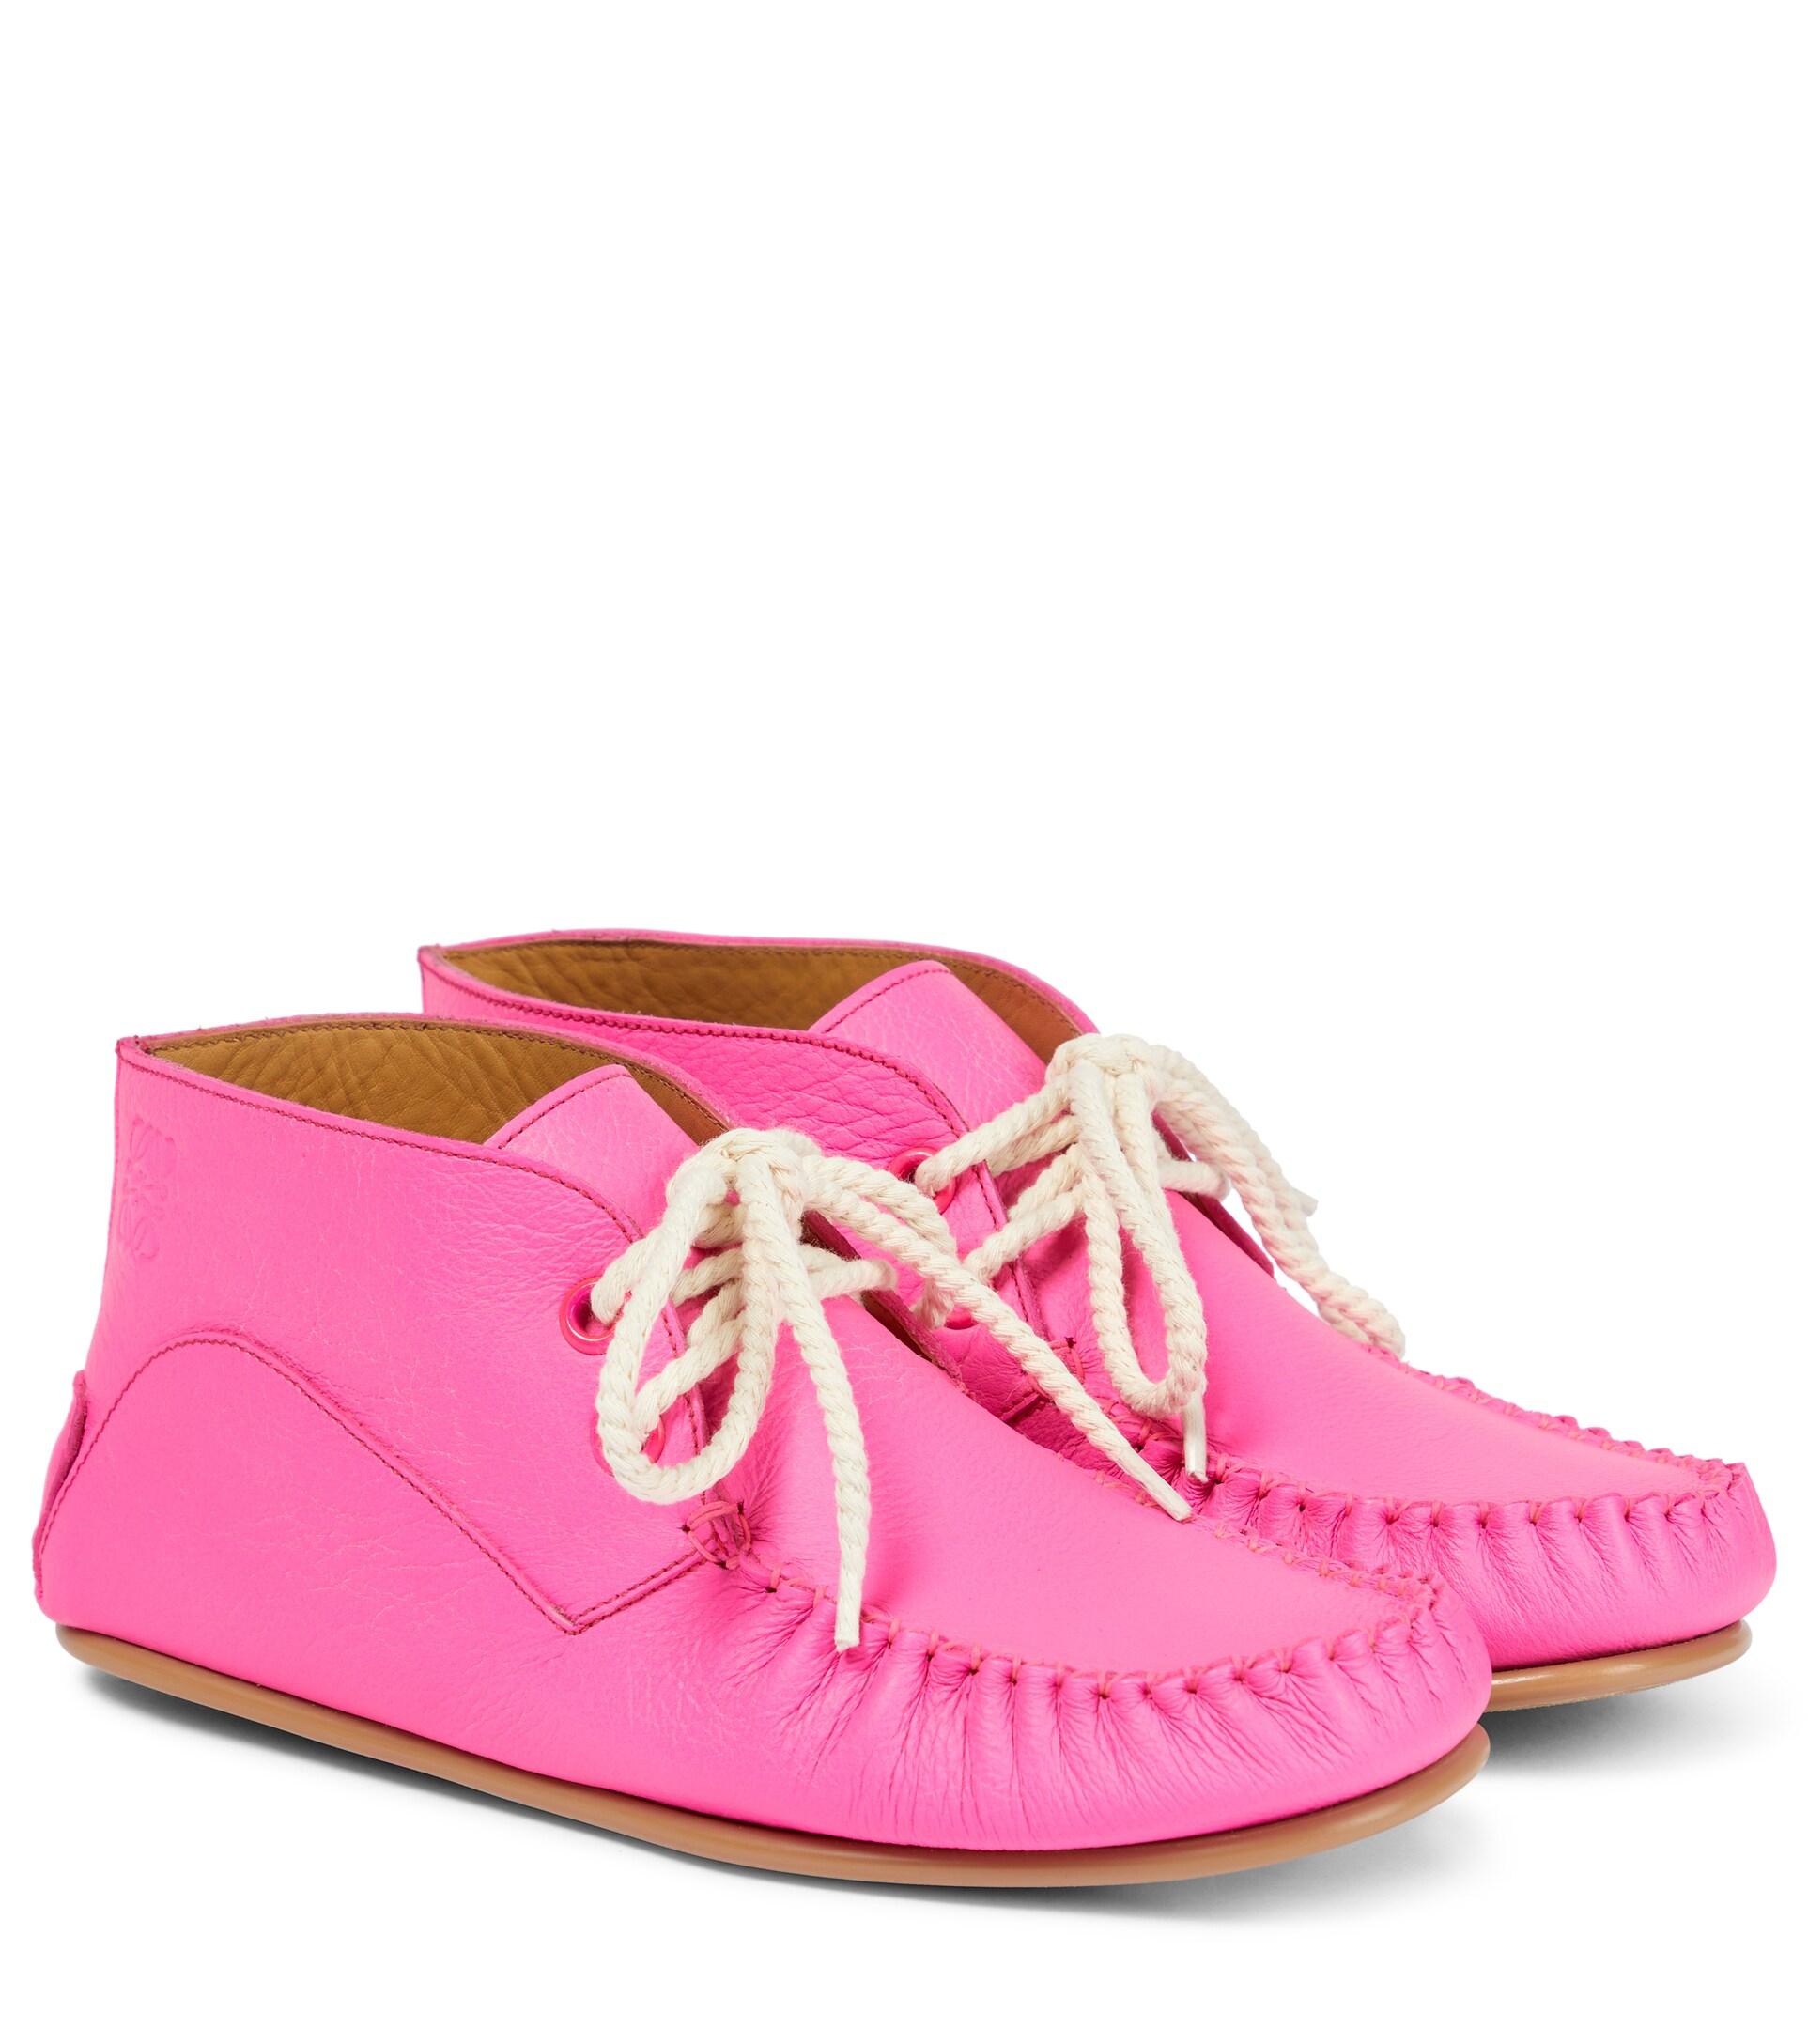 Loewe Leather Moccasins in Pink | Lyst